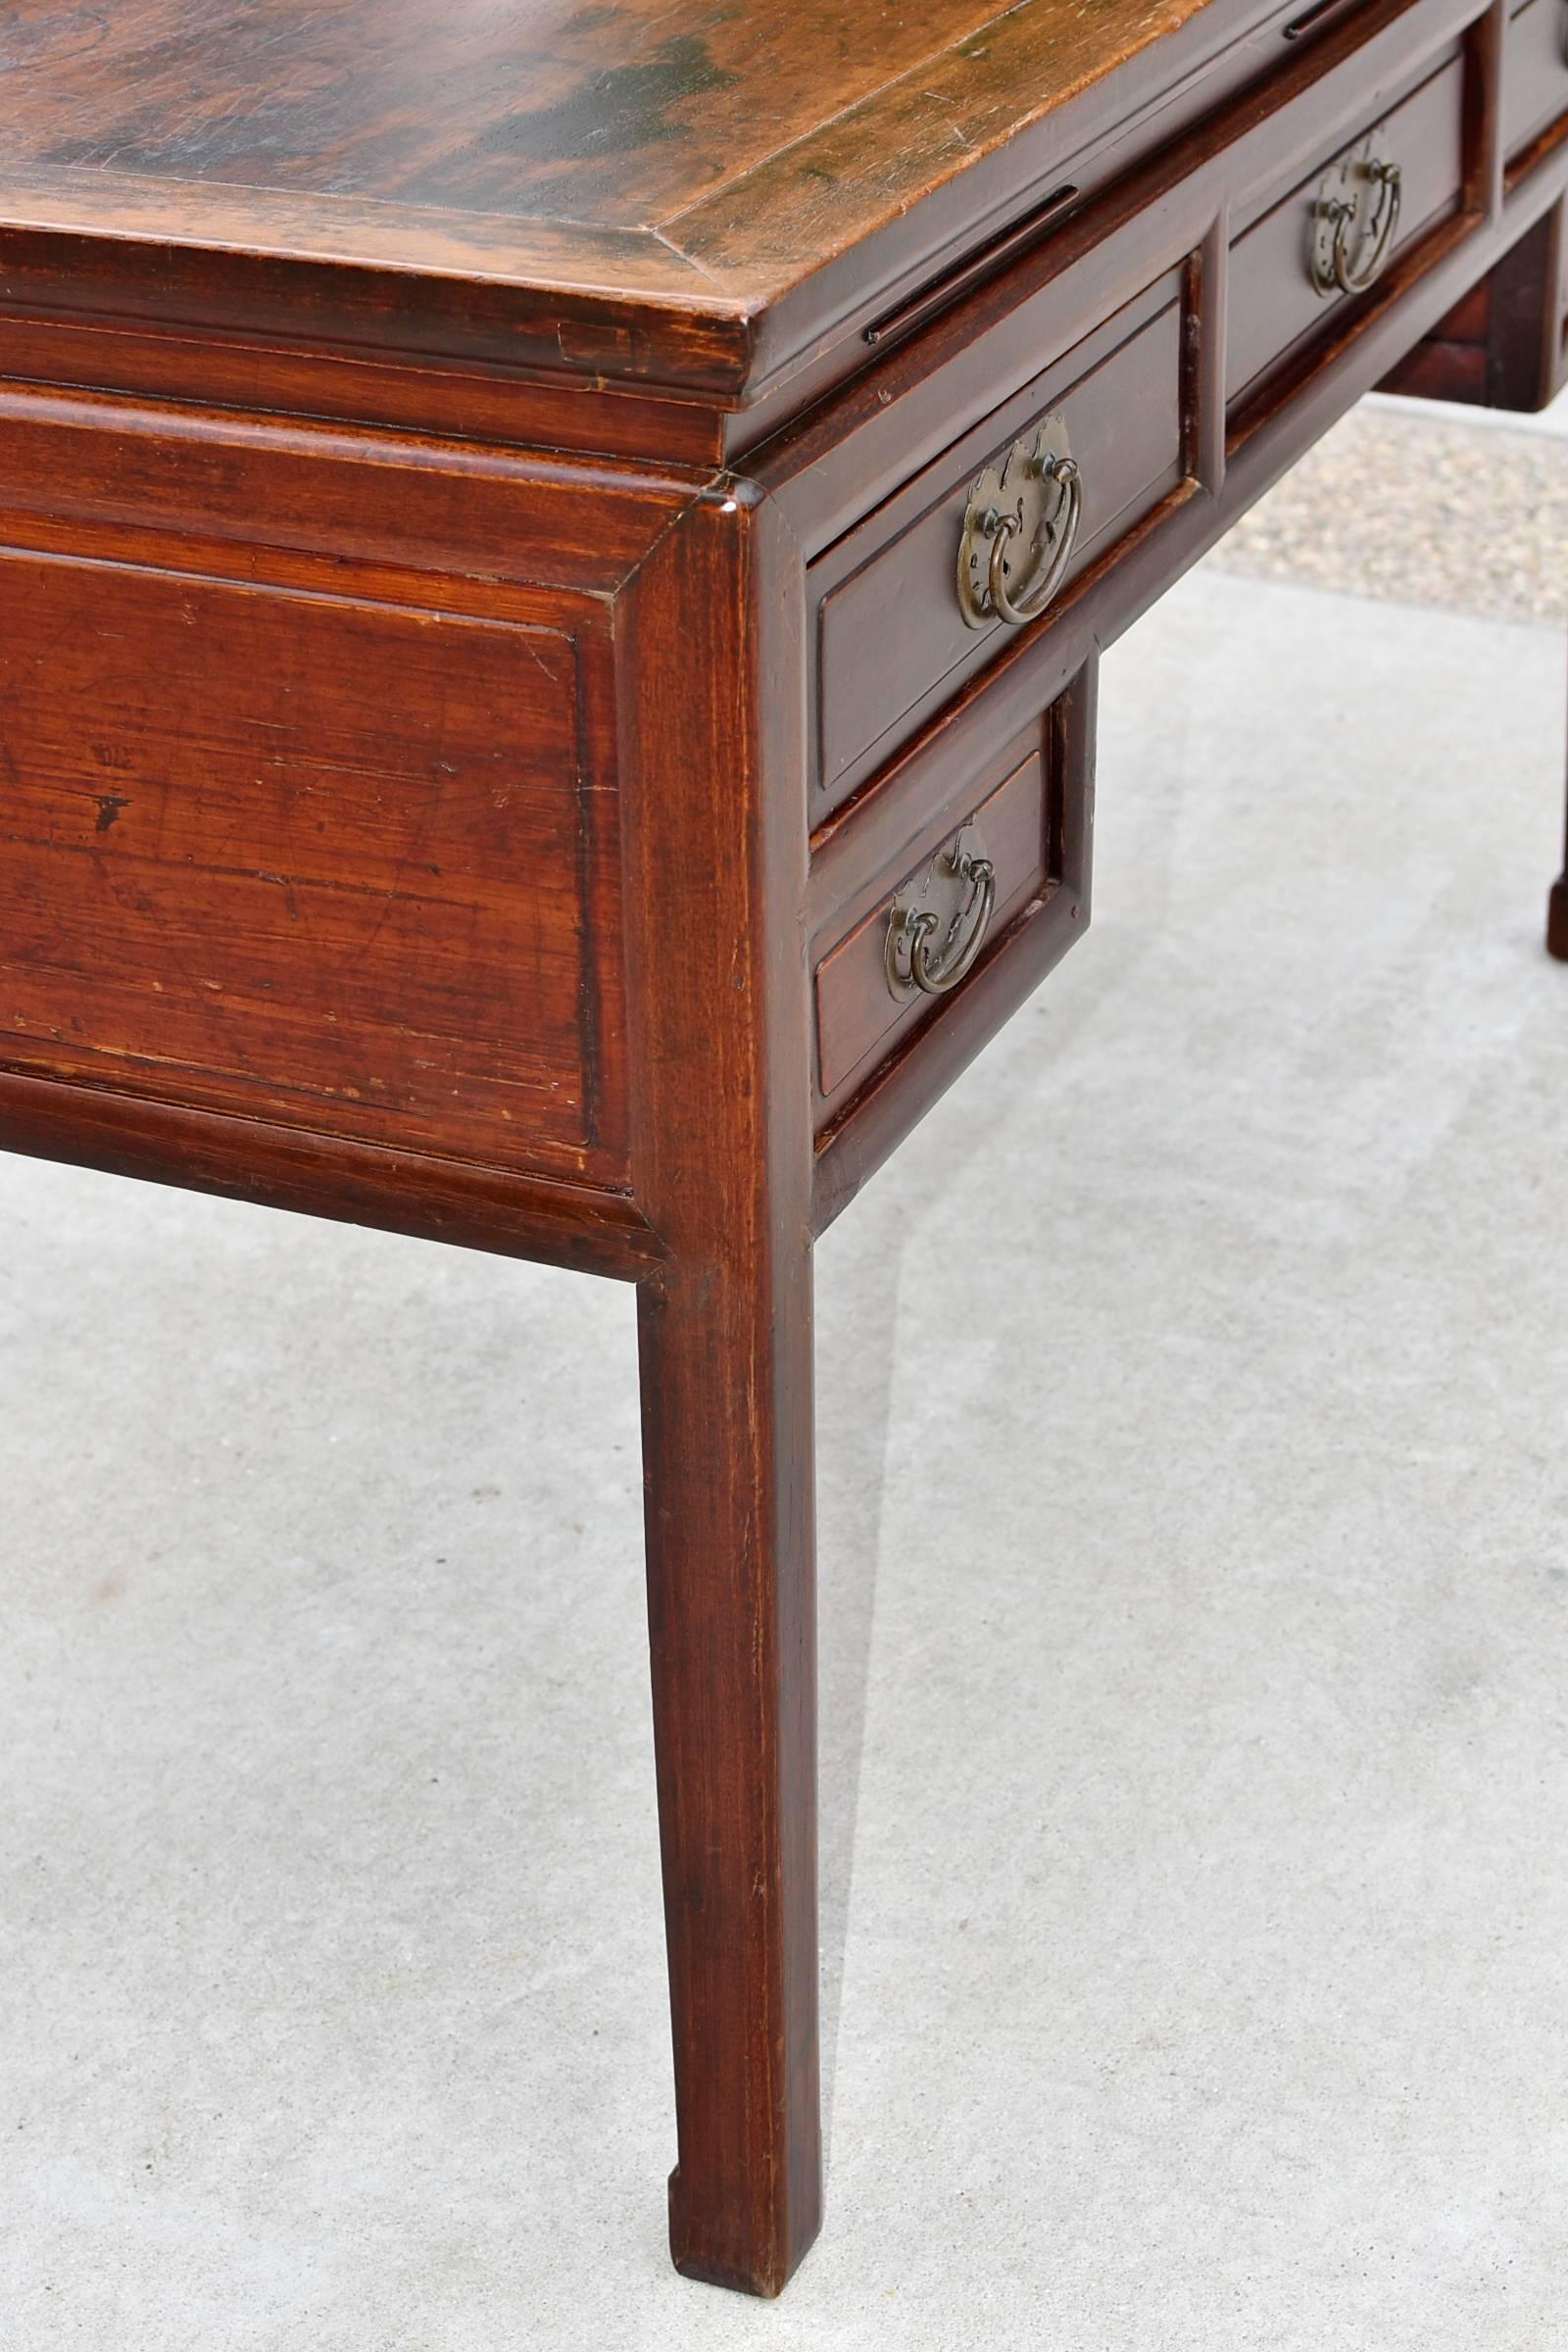 19th Century Antique Accountant's Desk, Chinese Solid Wood Desk